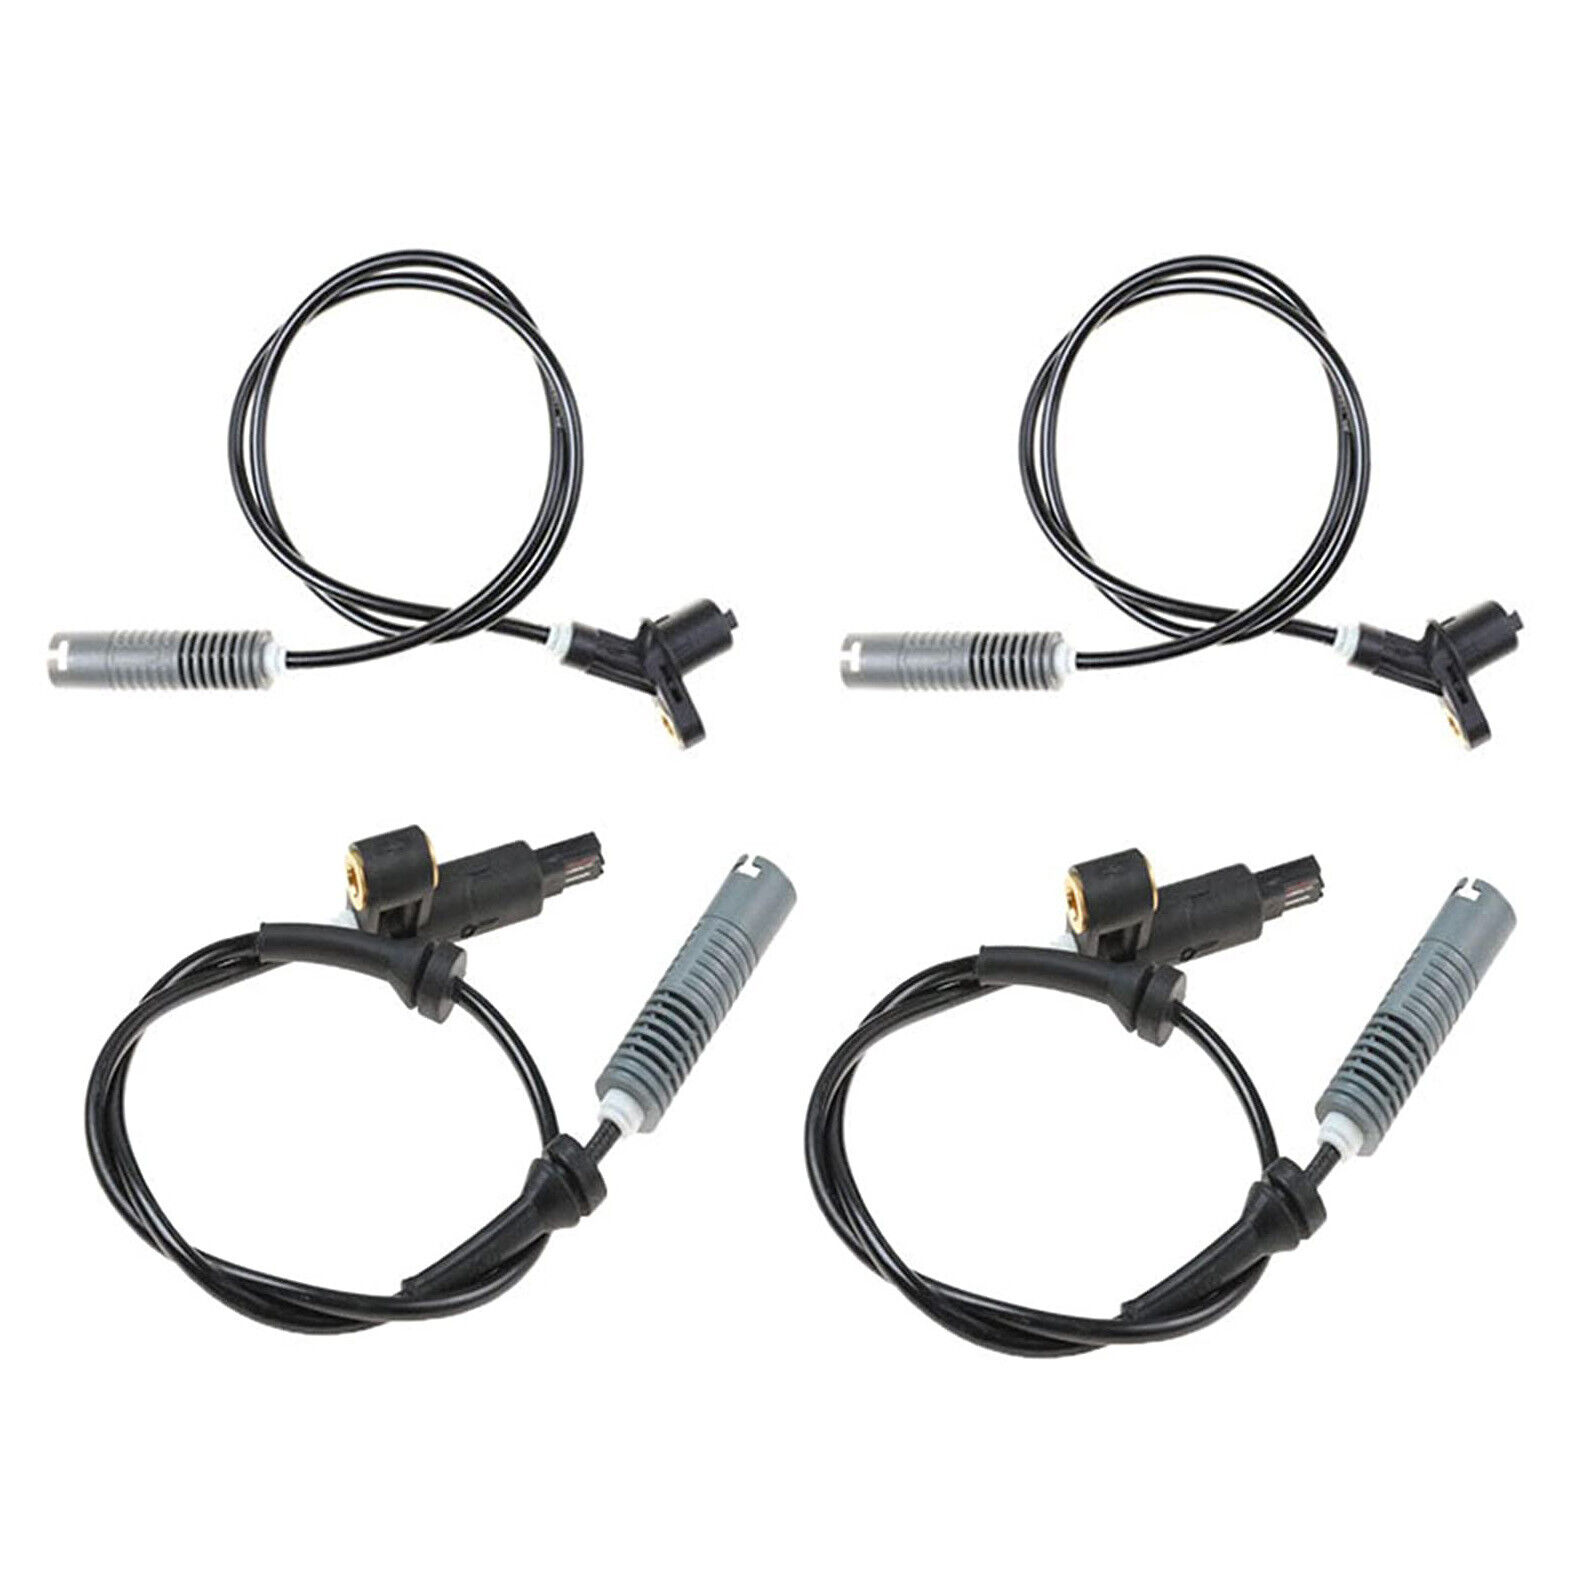 4PCS ABS Wheel Speed Sensor Fit For BMW 318 323i 323is 328i 325i M3 Front & Rear